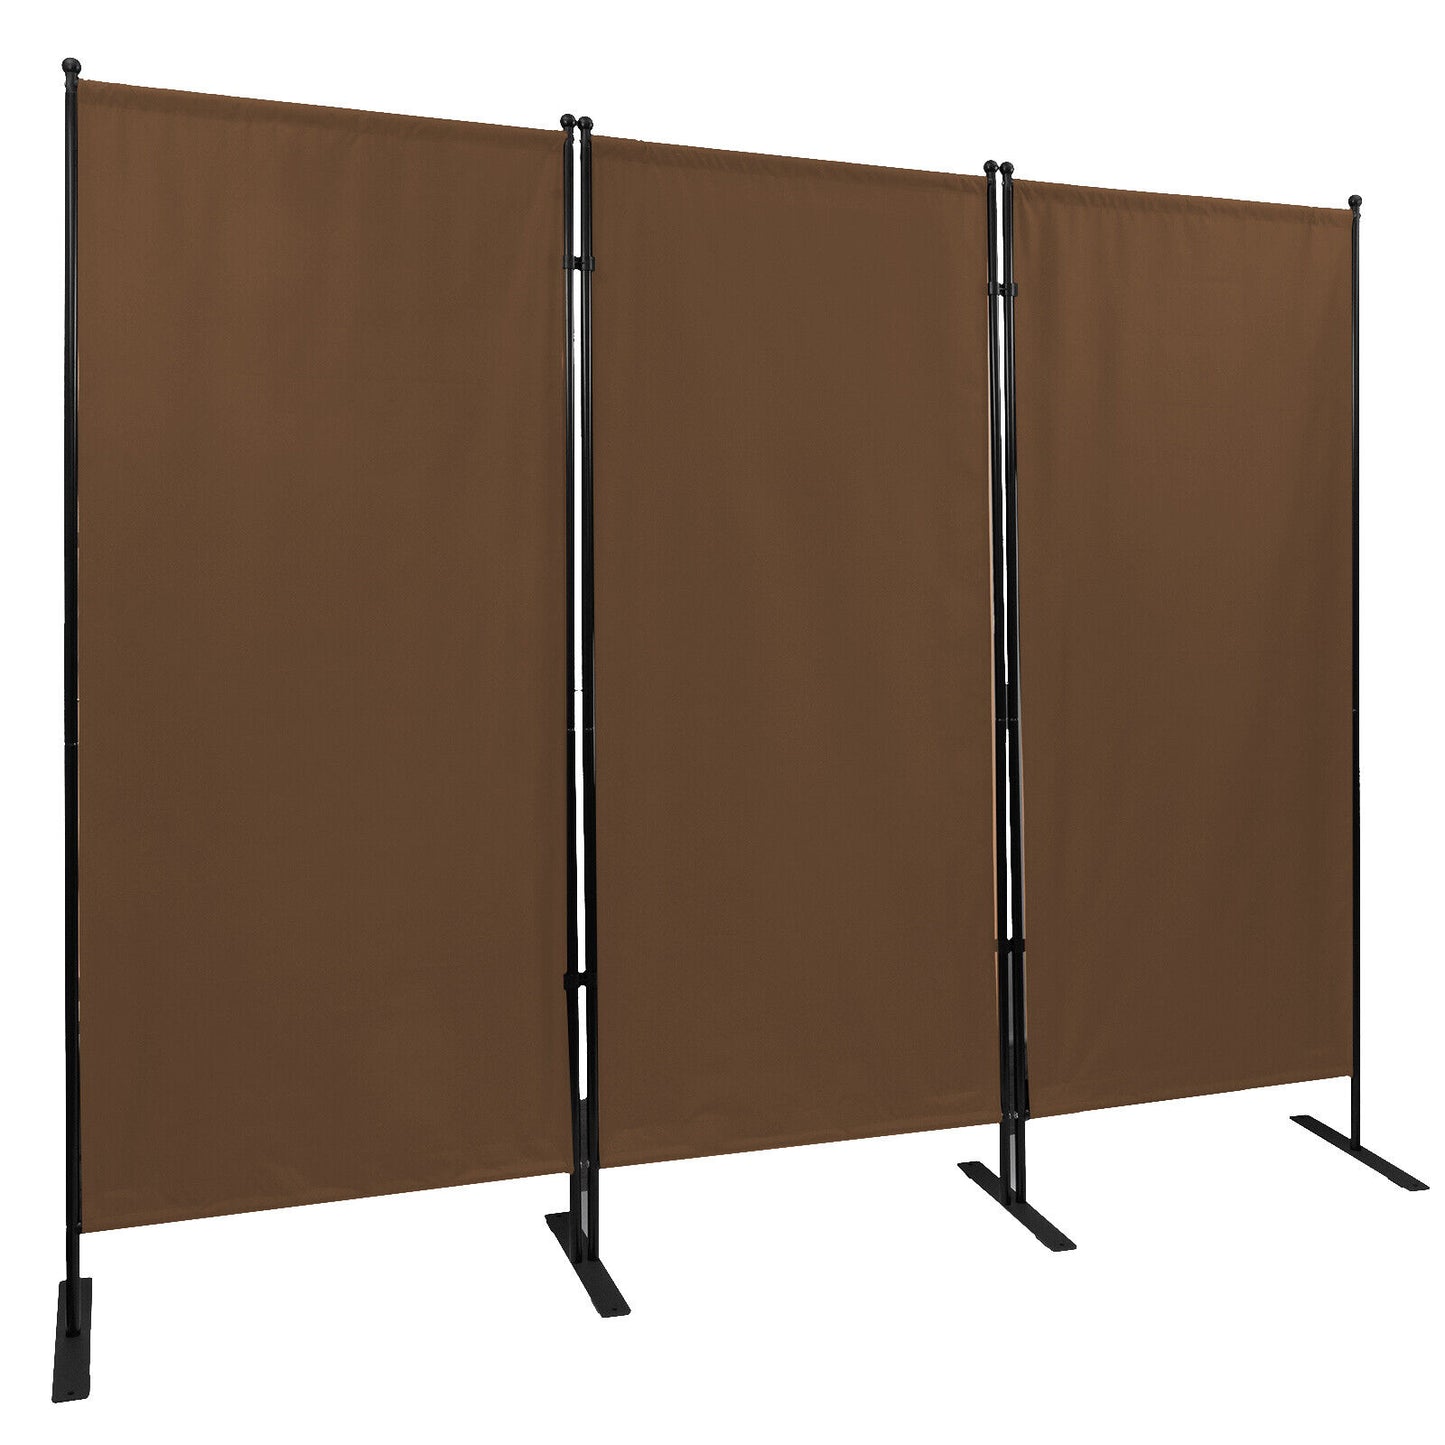 88"x71" 3-Panel Room Divider Privacy Folding Screen Home Office Fabric Brown